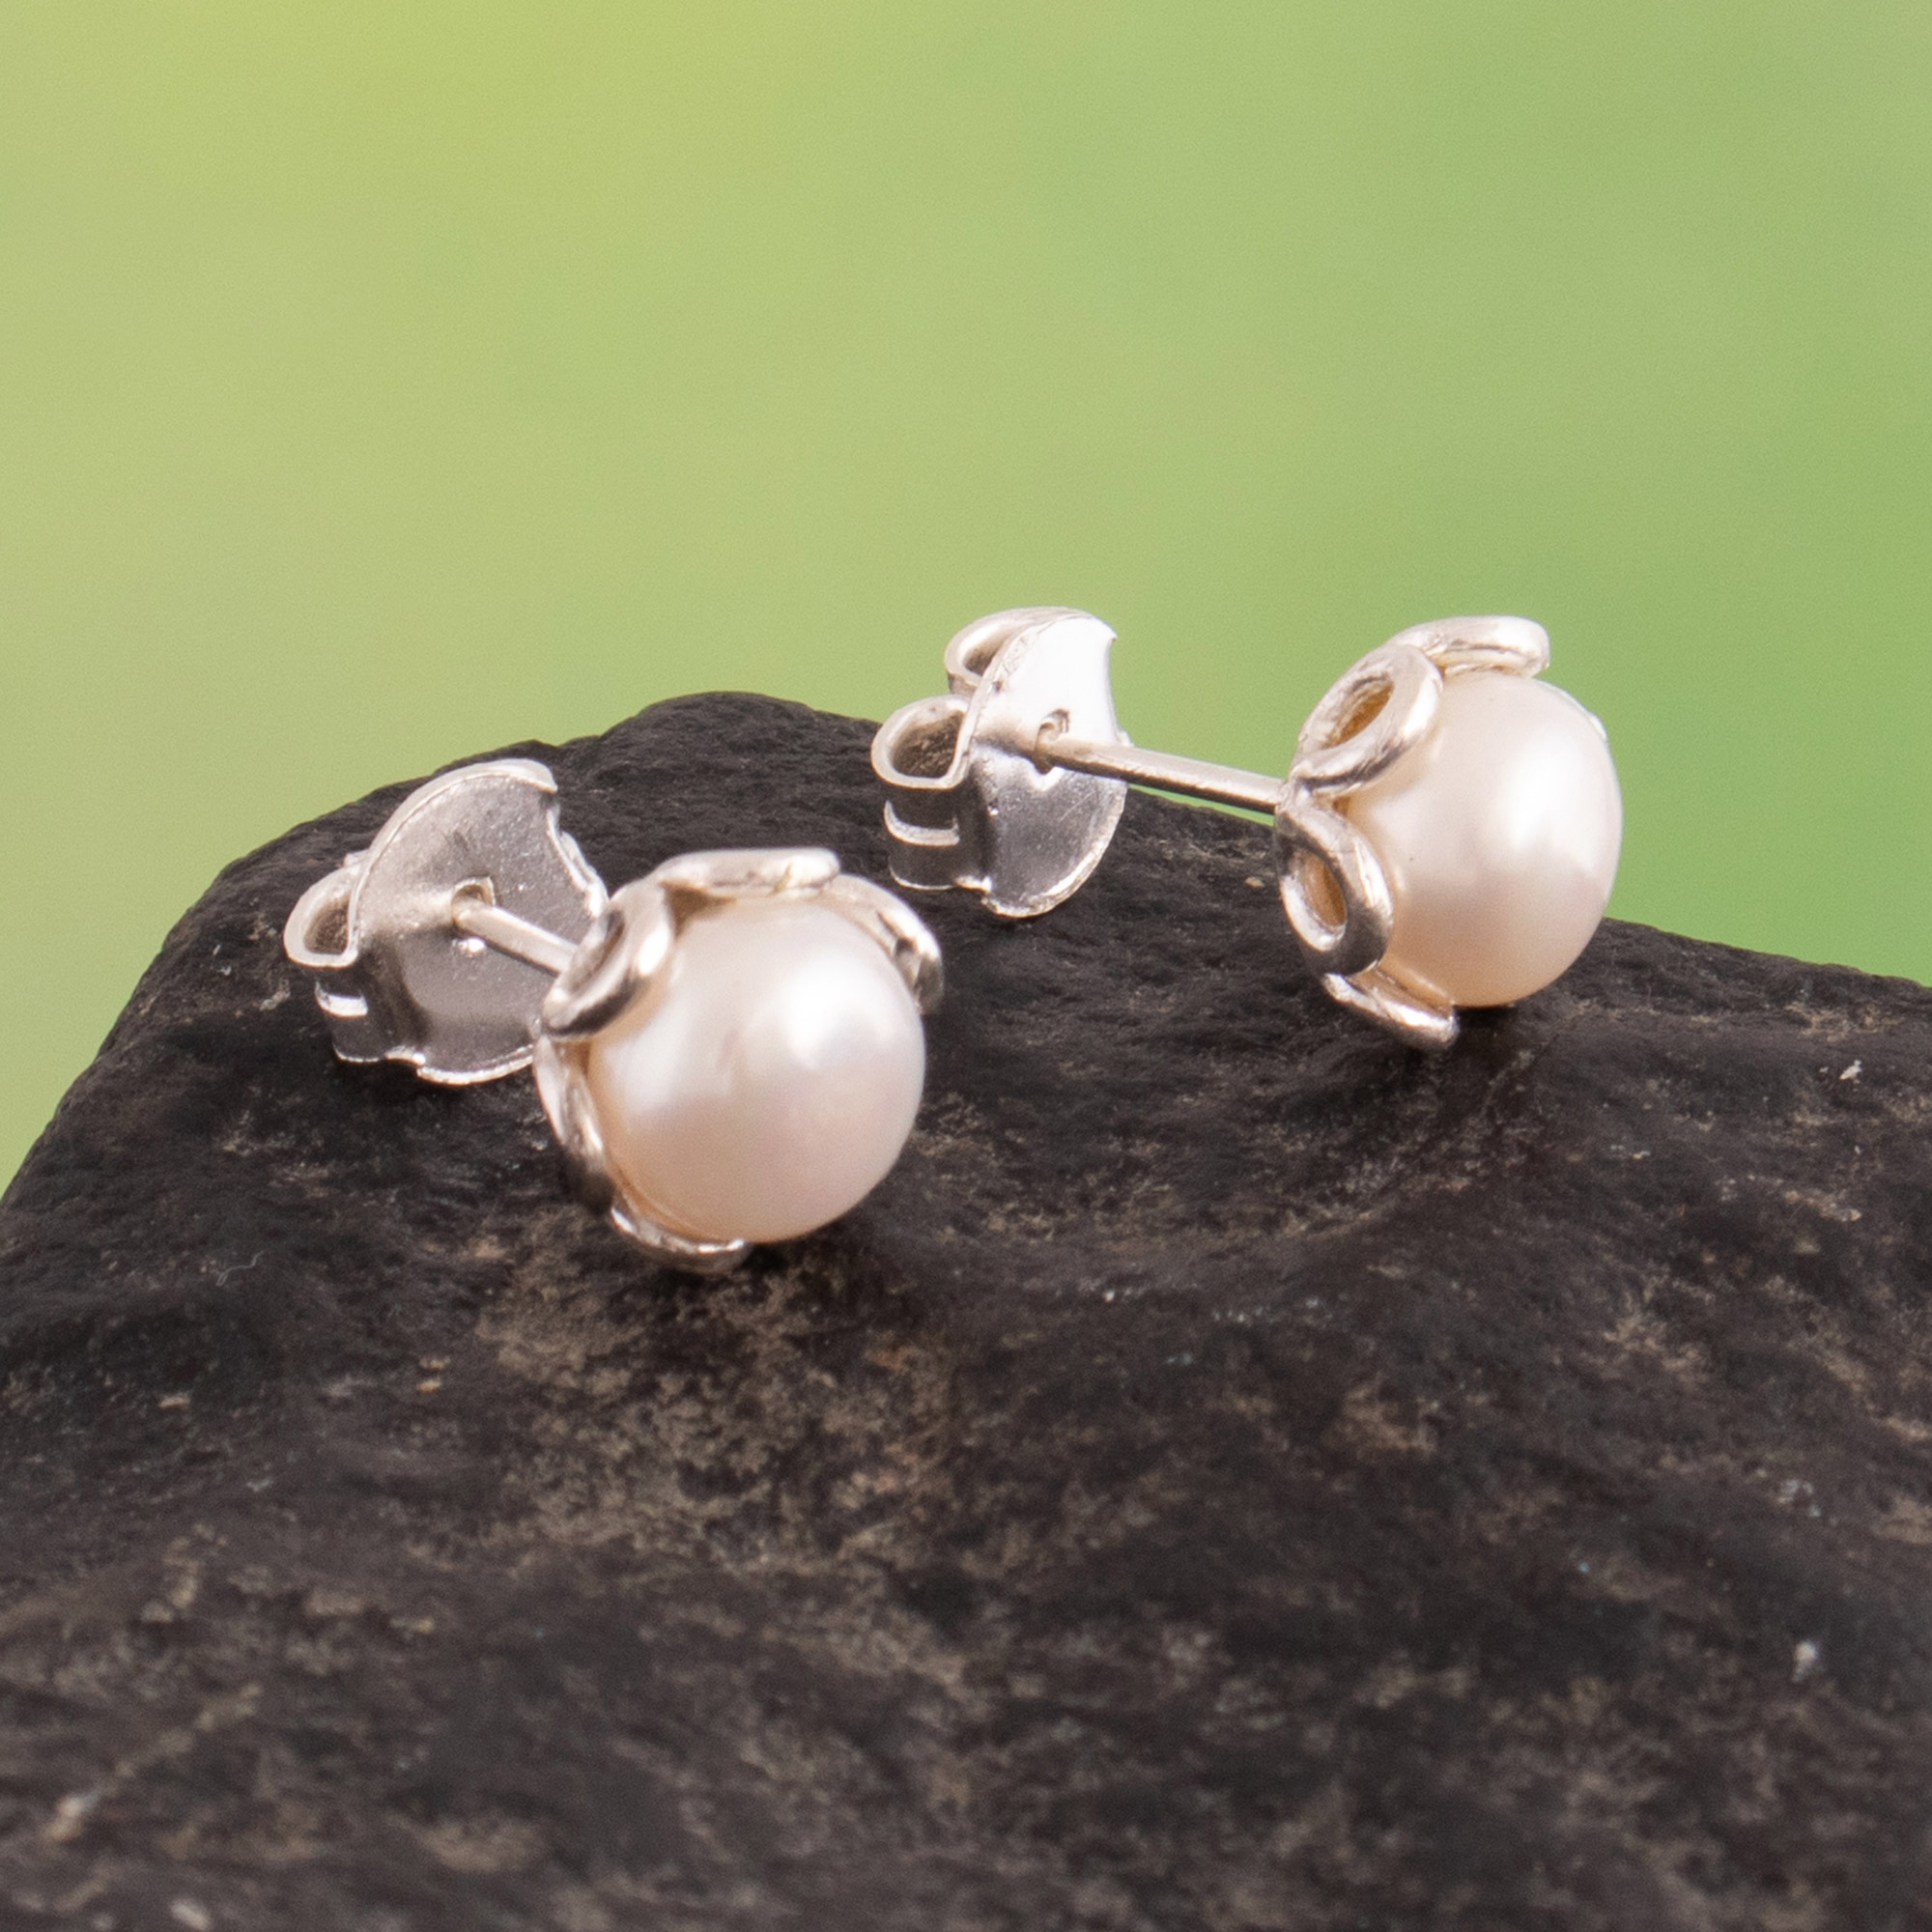 Sterling Silver Stud Earrings with White Cultured Pearls - Moonshine Charm